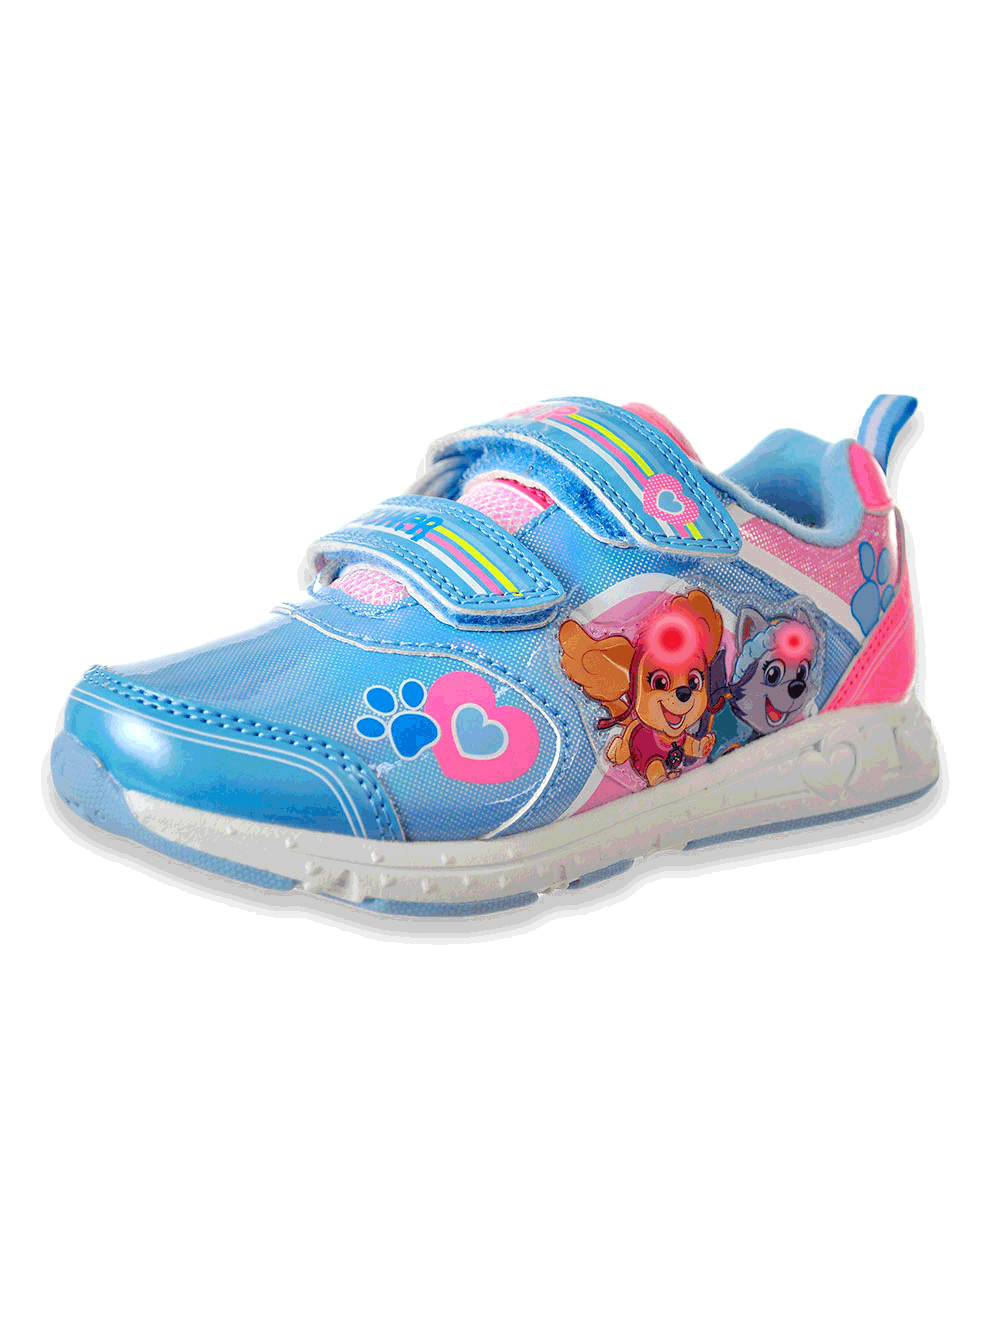 paw patrol girl light up shoes